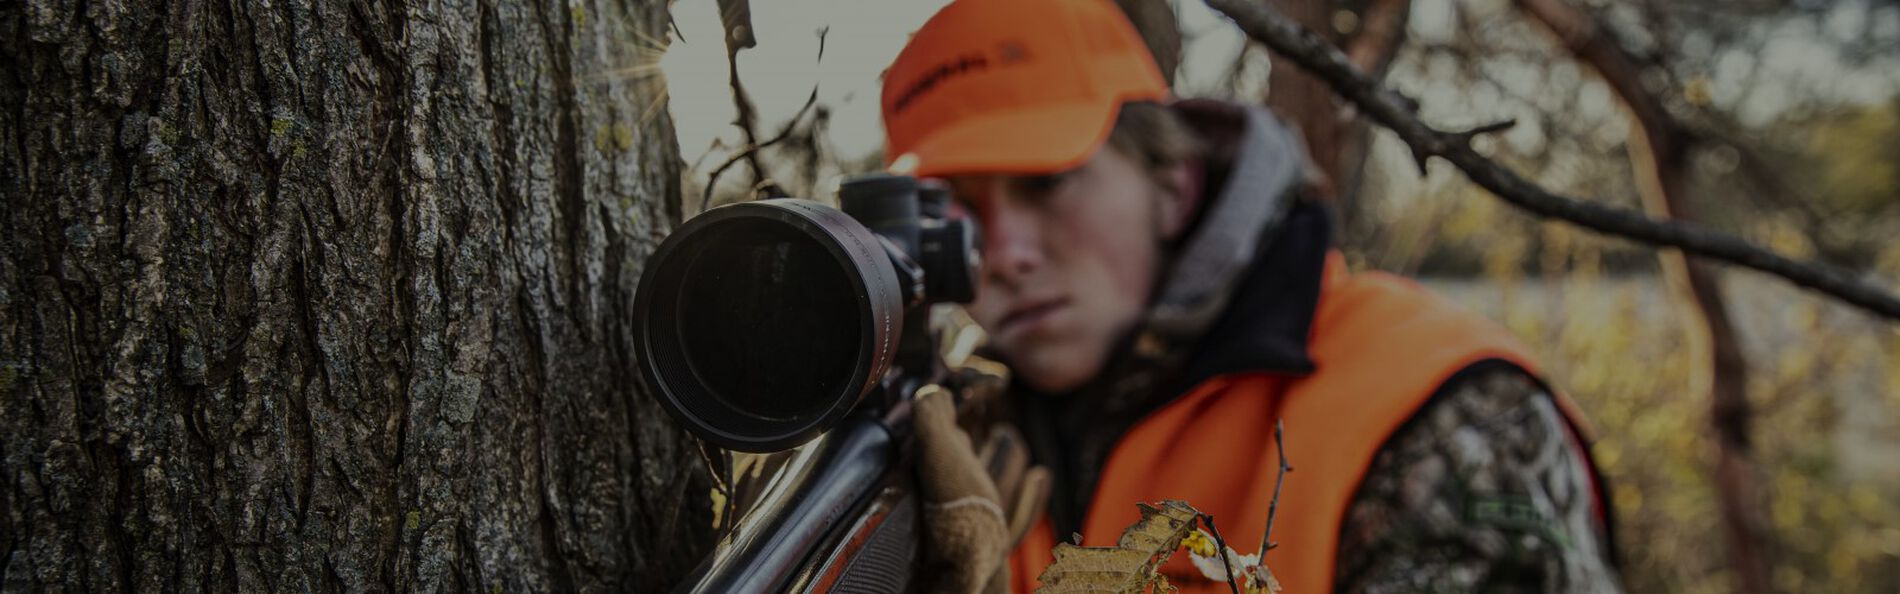 hunter looking down rifle scope while leaning against a tree